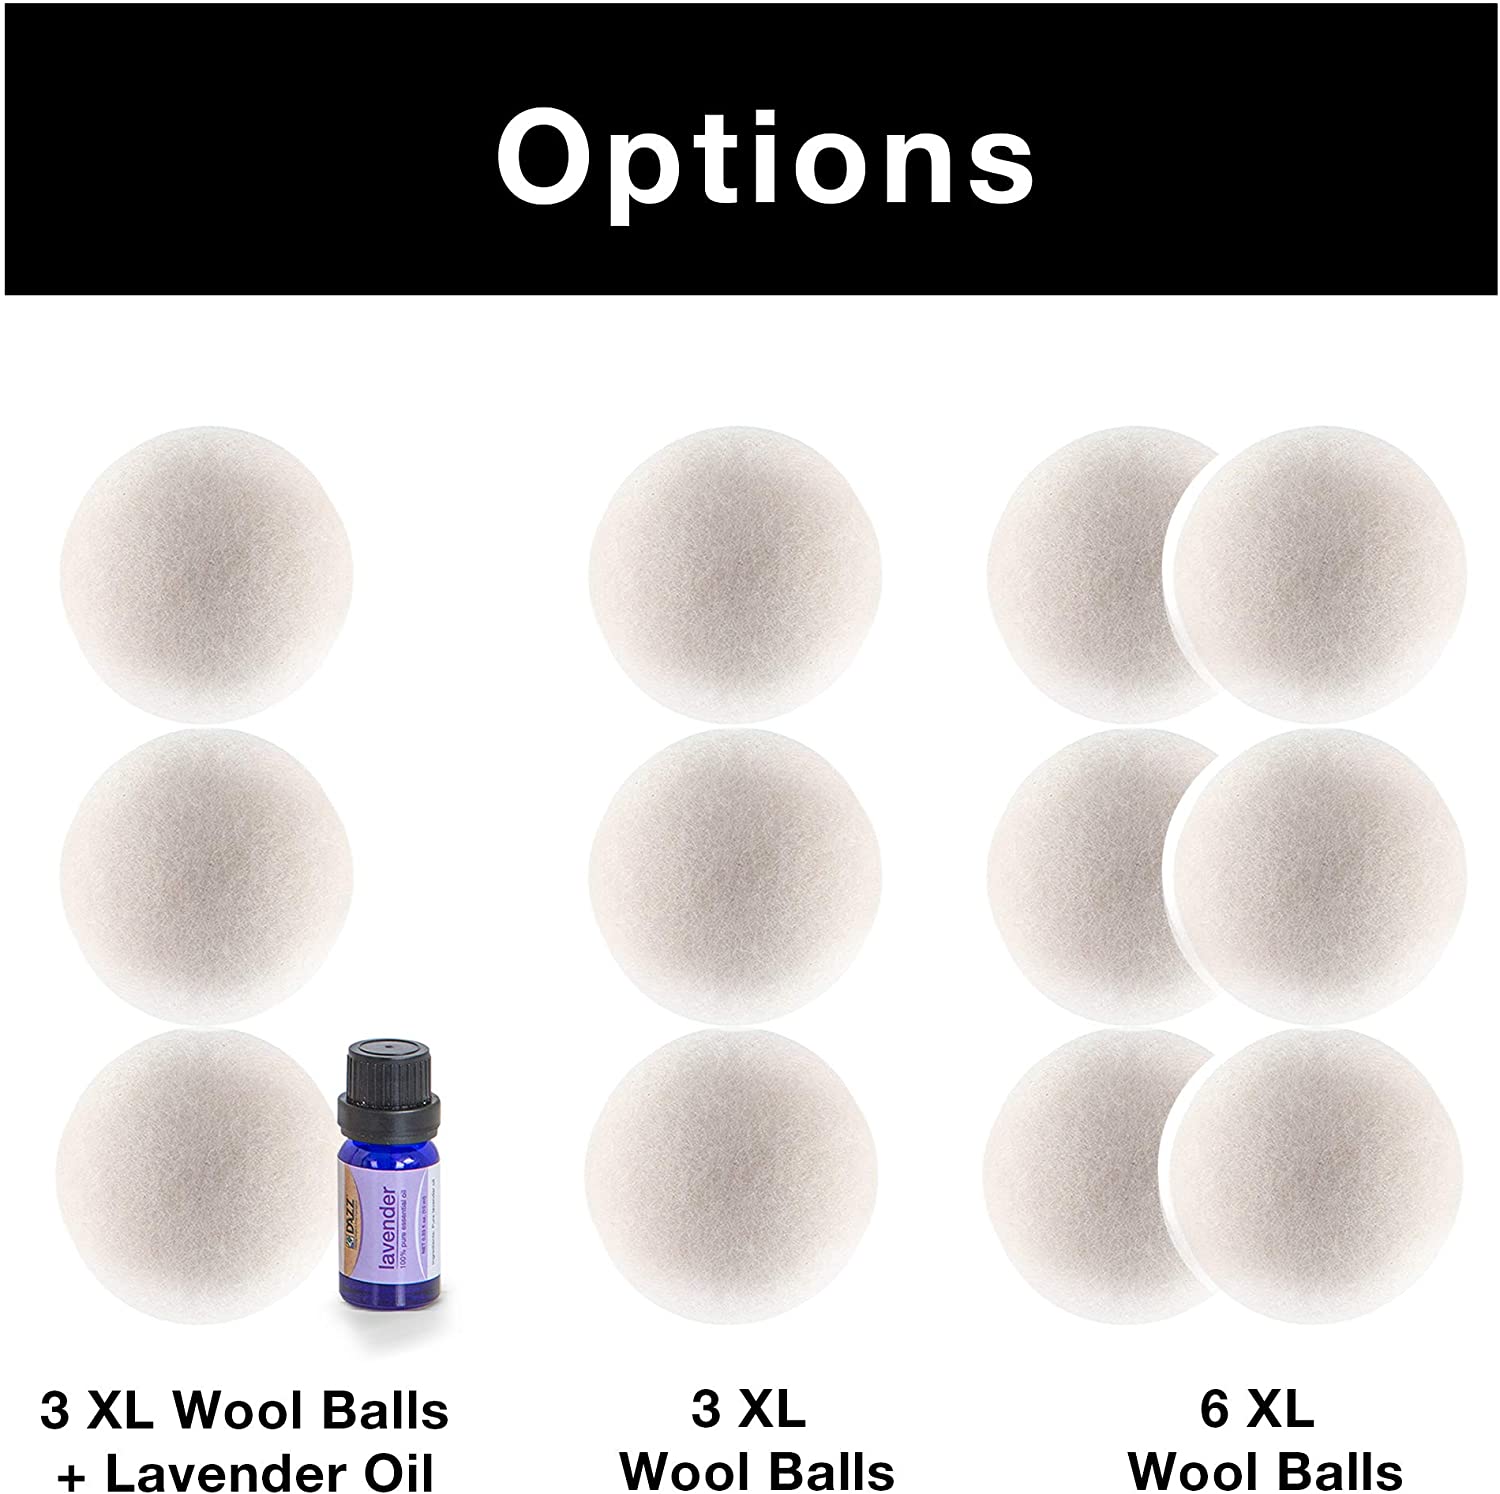 Wool Dryer Balls - Natural Fabric Softener - Pack of 6